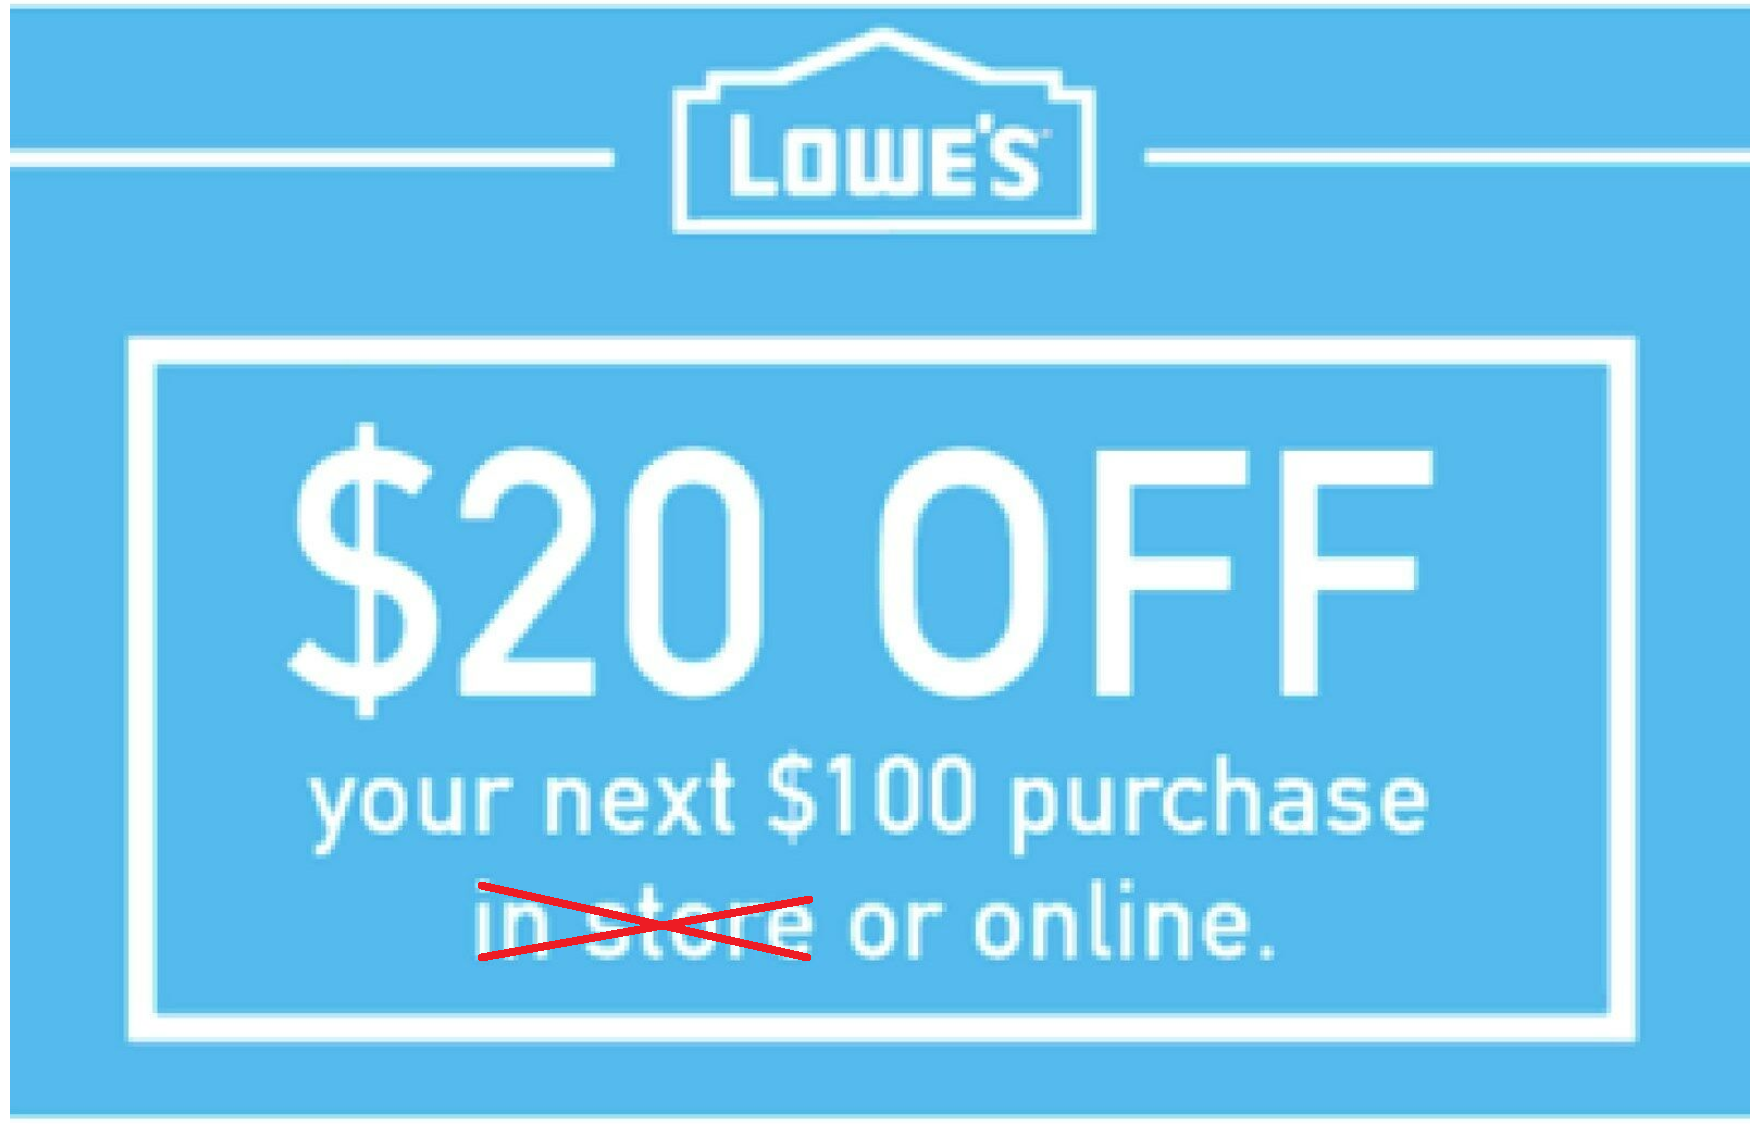 lowes coupon generate barcode